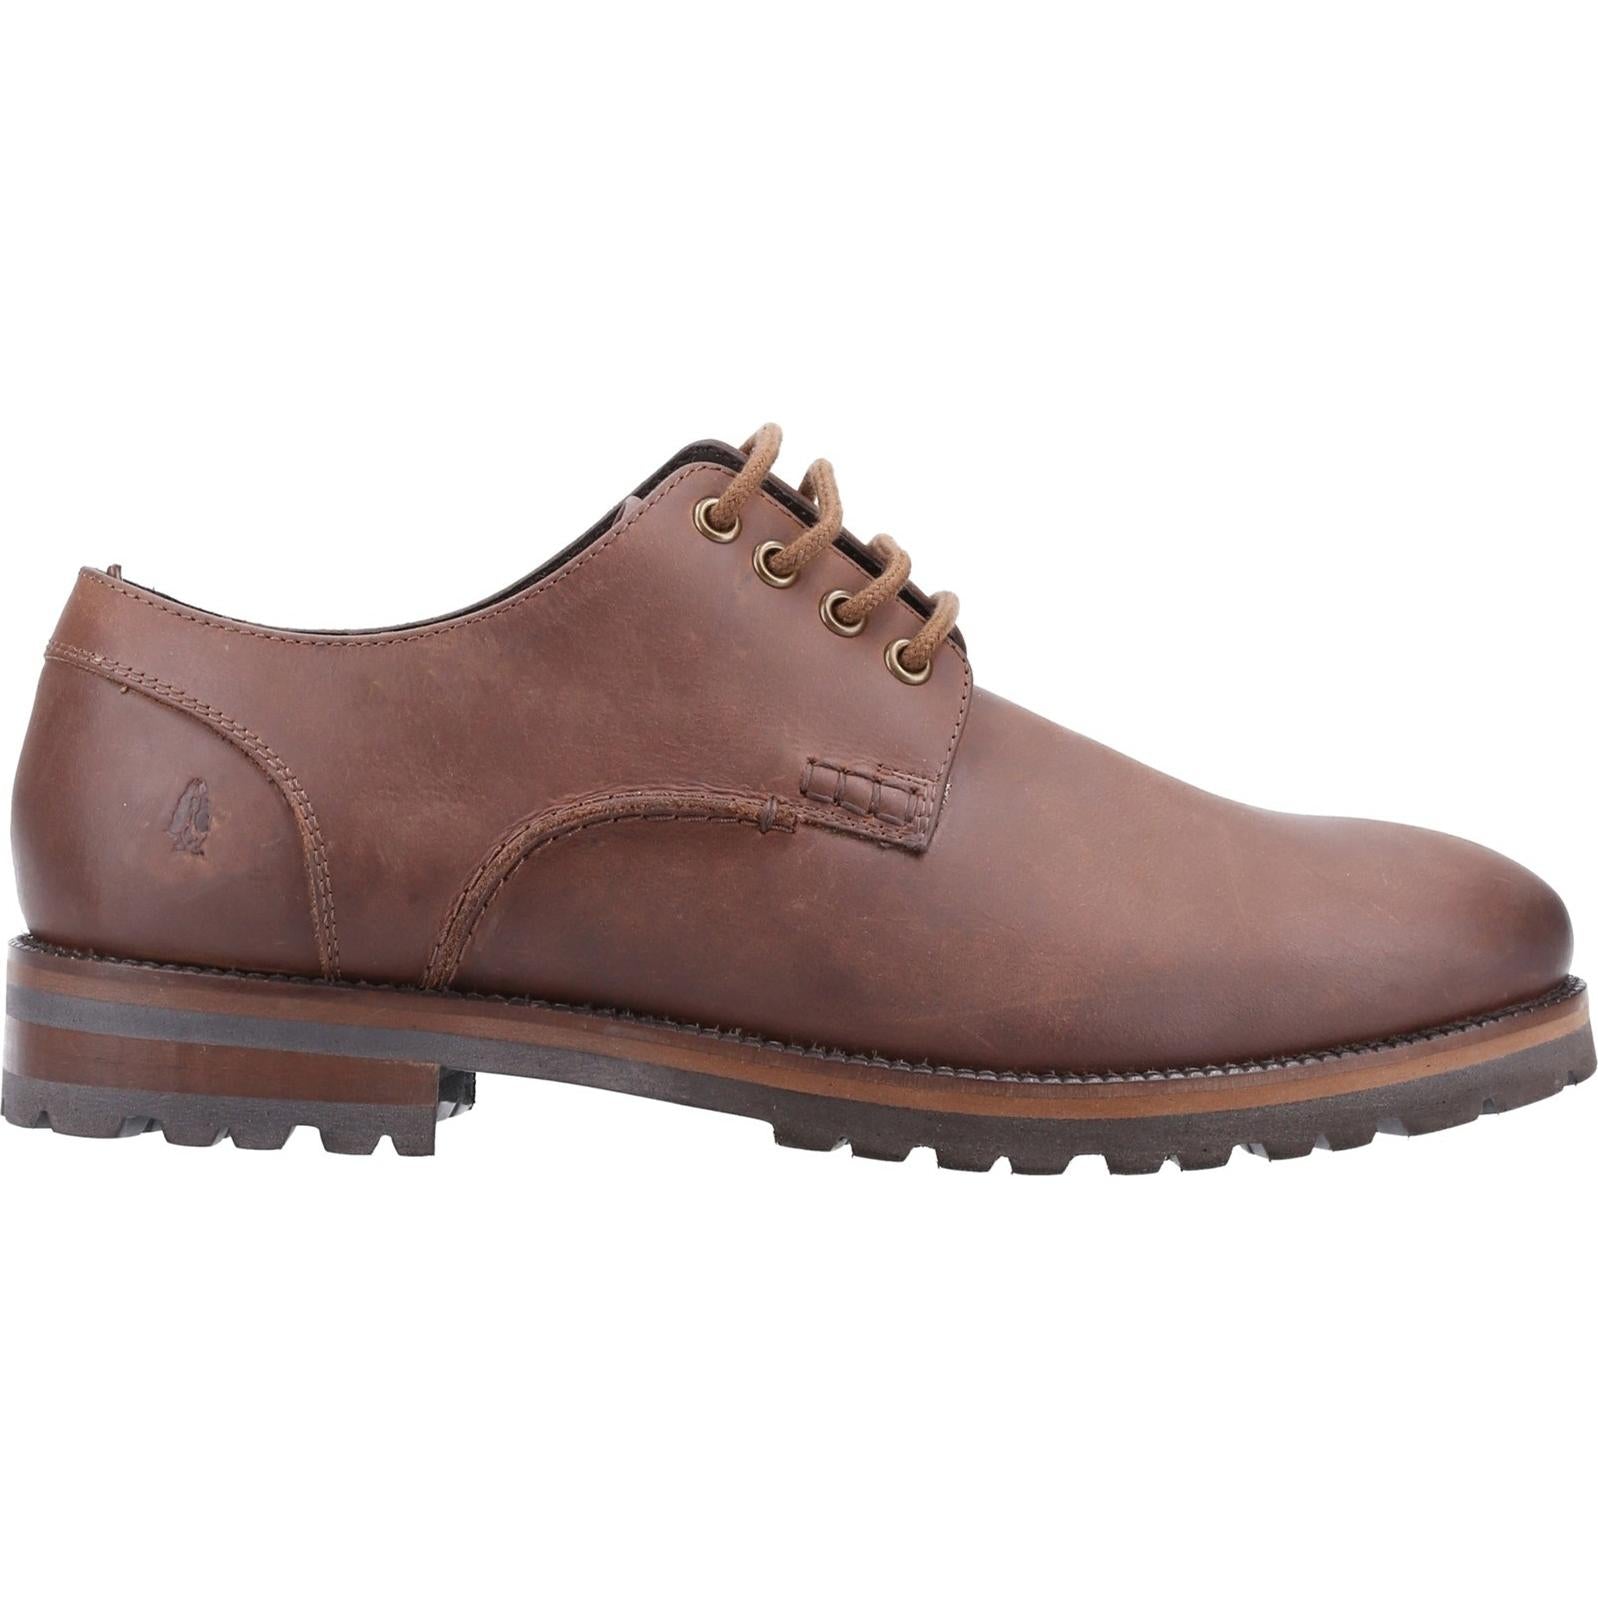 Hush Puppies Travis Lace Up Shoes